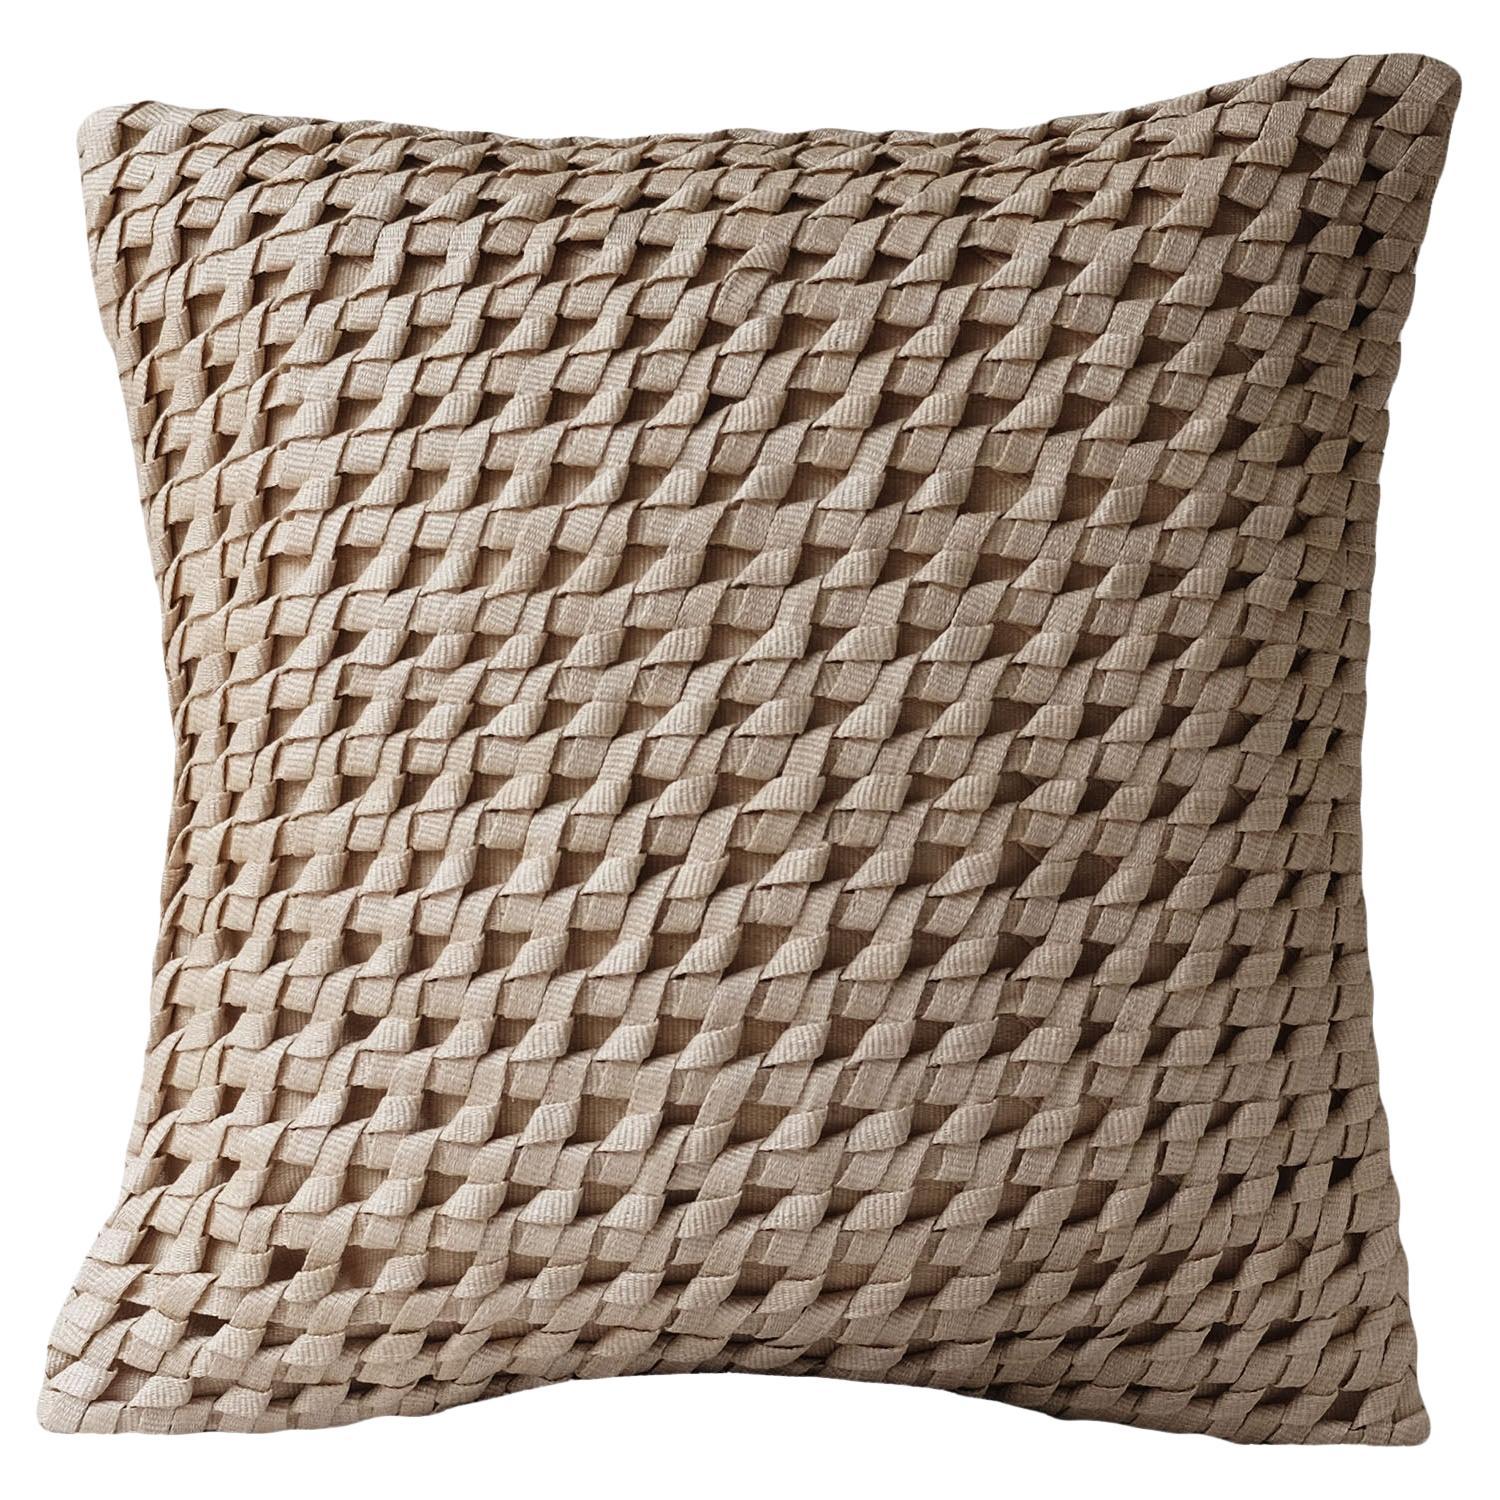 Handcrafted T'nalak Diagonal Knot Weave Cushion Cover For Sale